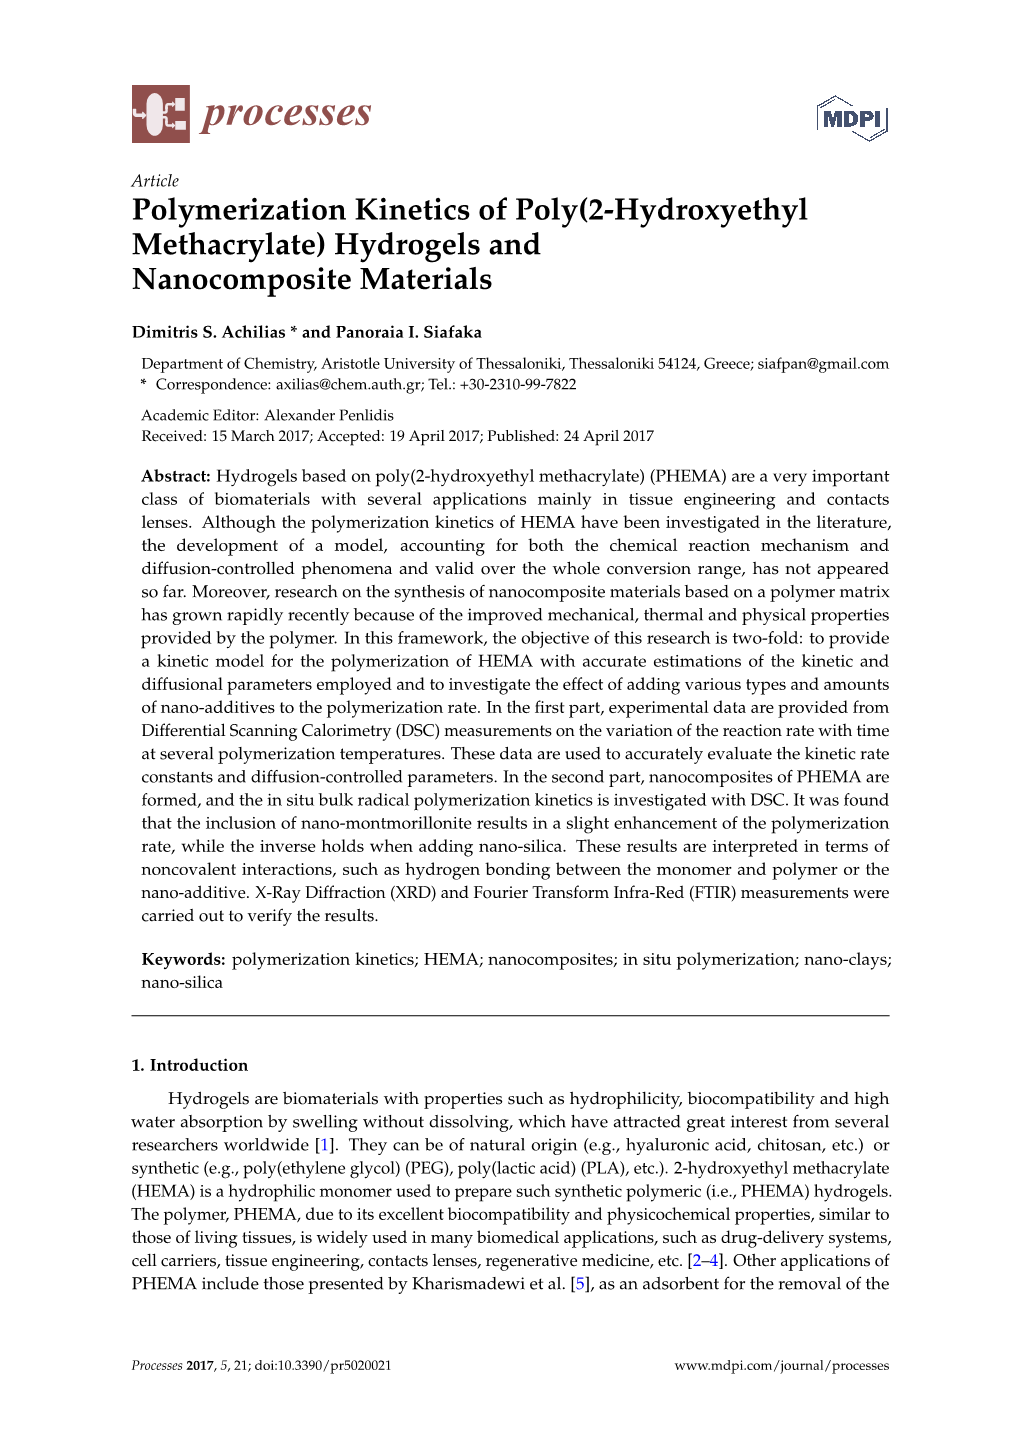 Polymerization Kinetics of Poly(2-Hydroxyethyl Methacrylate) Hydrogels and Nanocomposite Materials